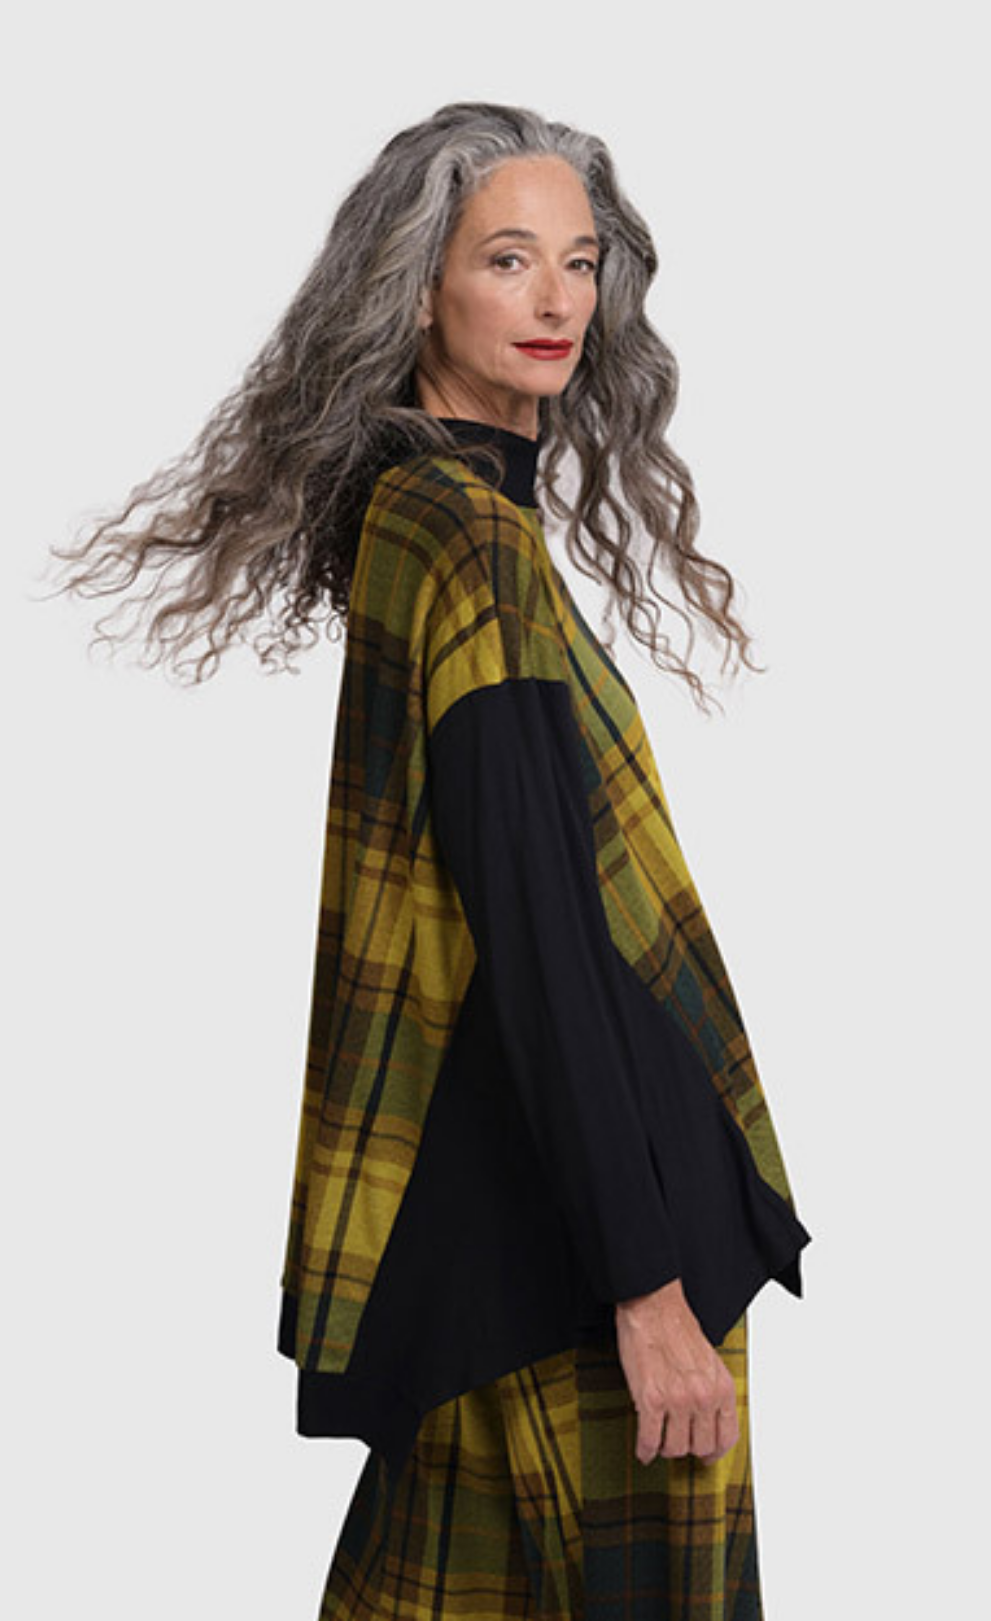 Right side top half view of a woman wearing black pants and the alembika plaid trapeze top. This top is a yellow and green plaid with solid black drop shoulder sleeves. The top has a funnel neck, side slits, and black detailing around the hem